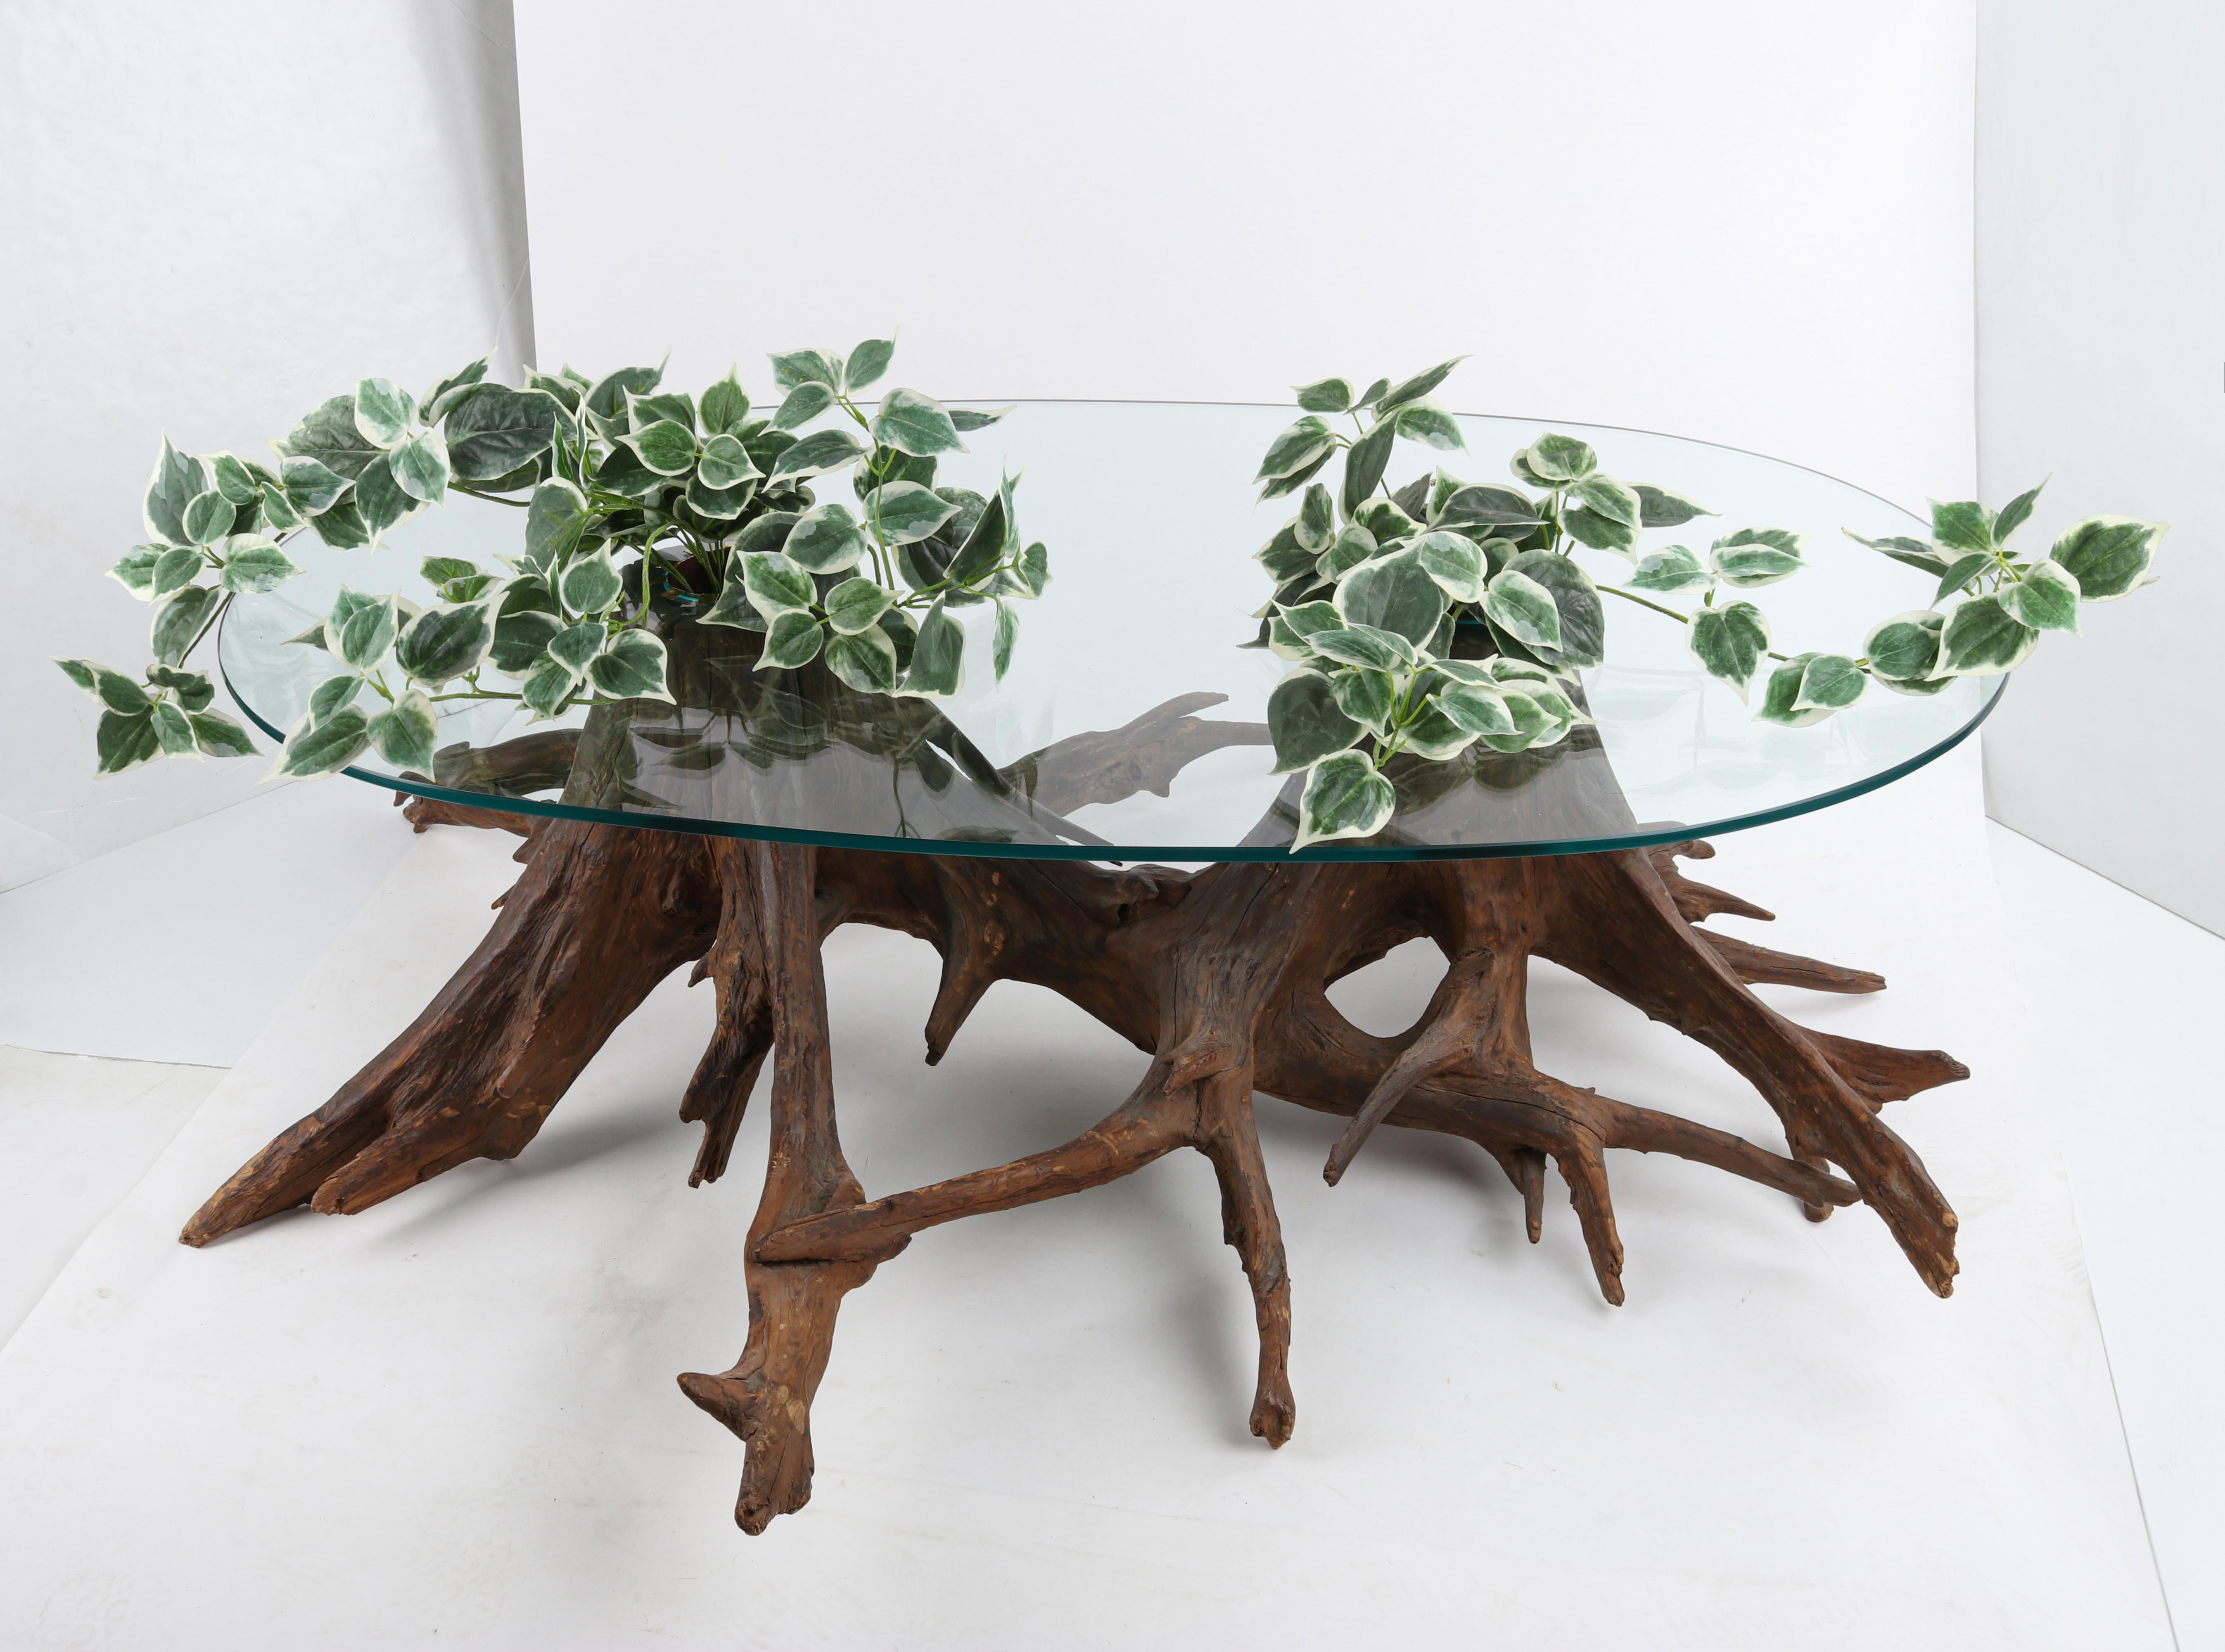 Truly unique and one-of-a-kind driftwood coffee center table with planter inserts. Nature surely delivers some beautiful artwork, such as this sculpted wood base. The shape mimics that of two separate tree trunks with their entangled root bases. The